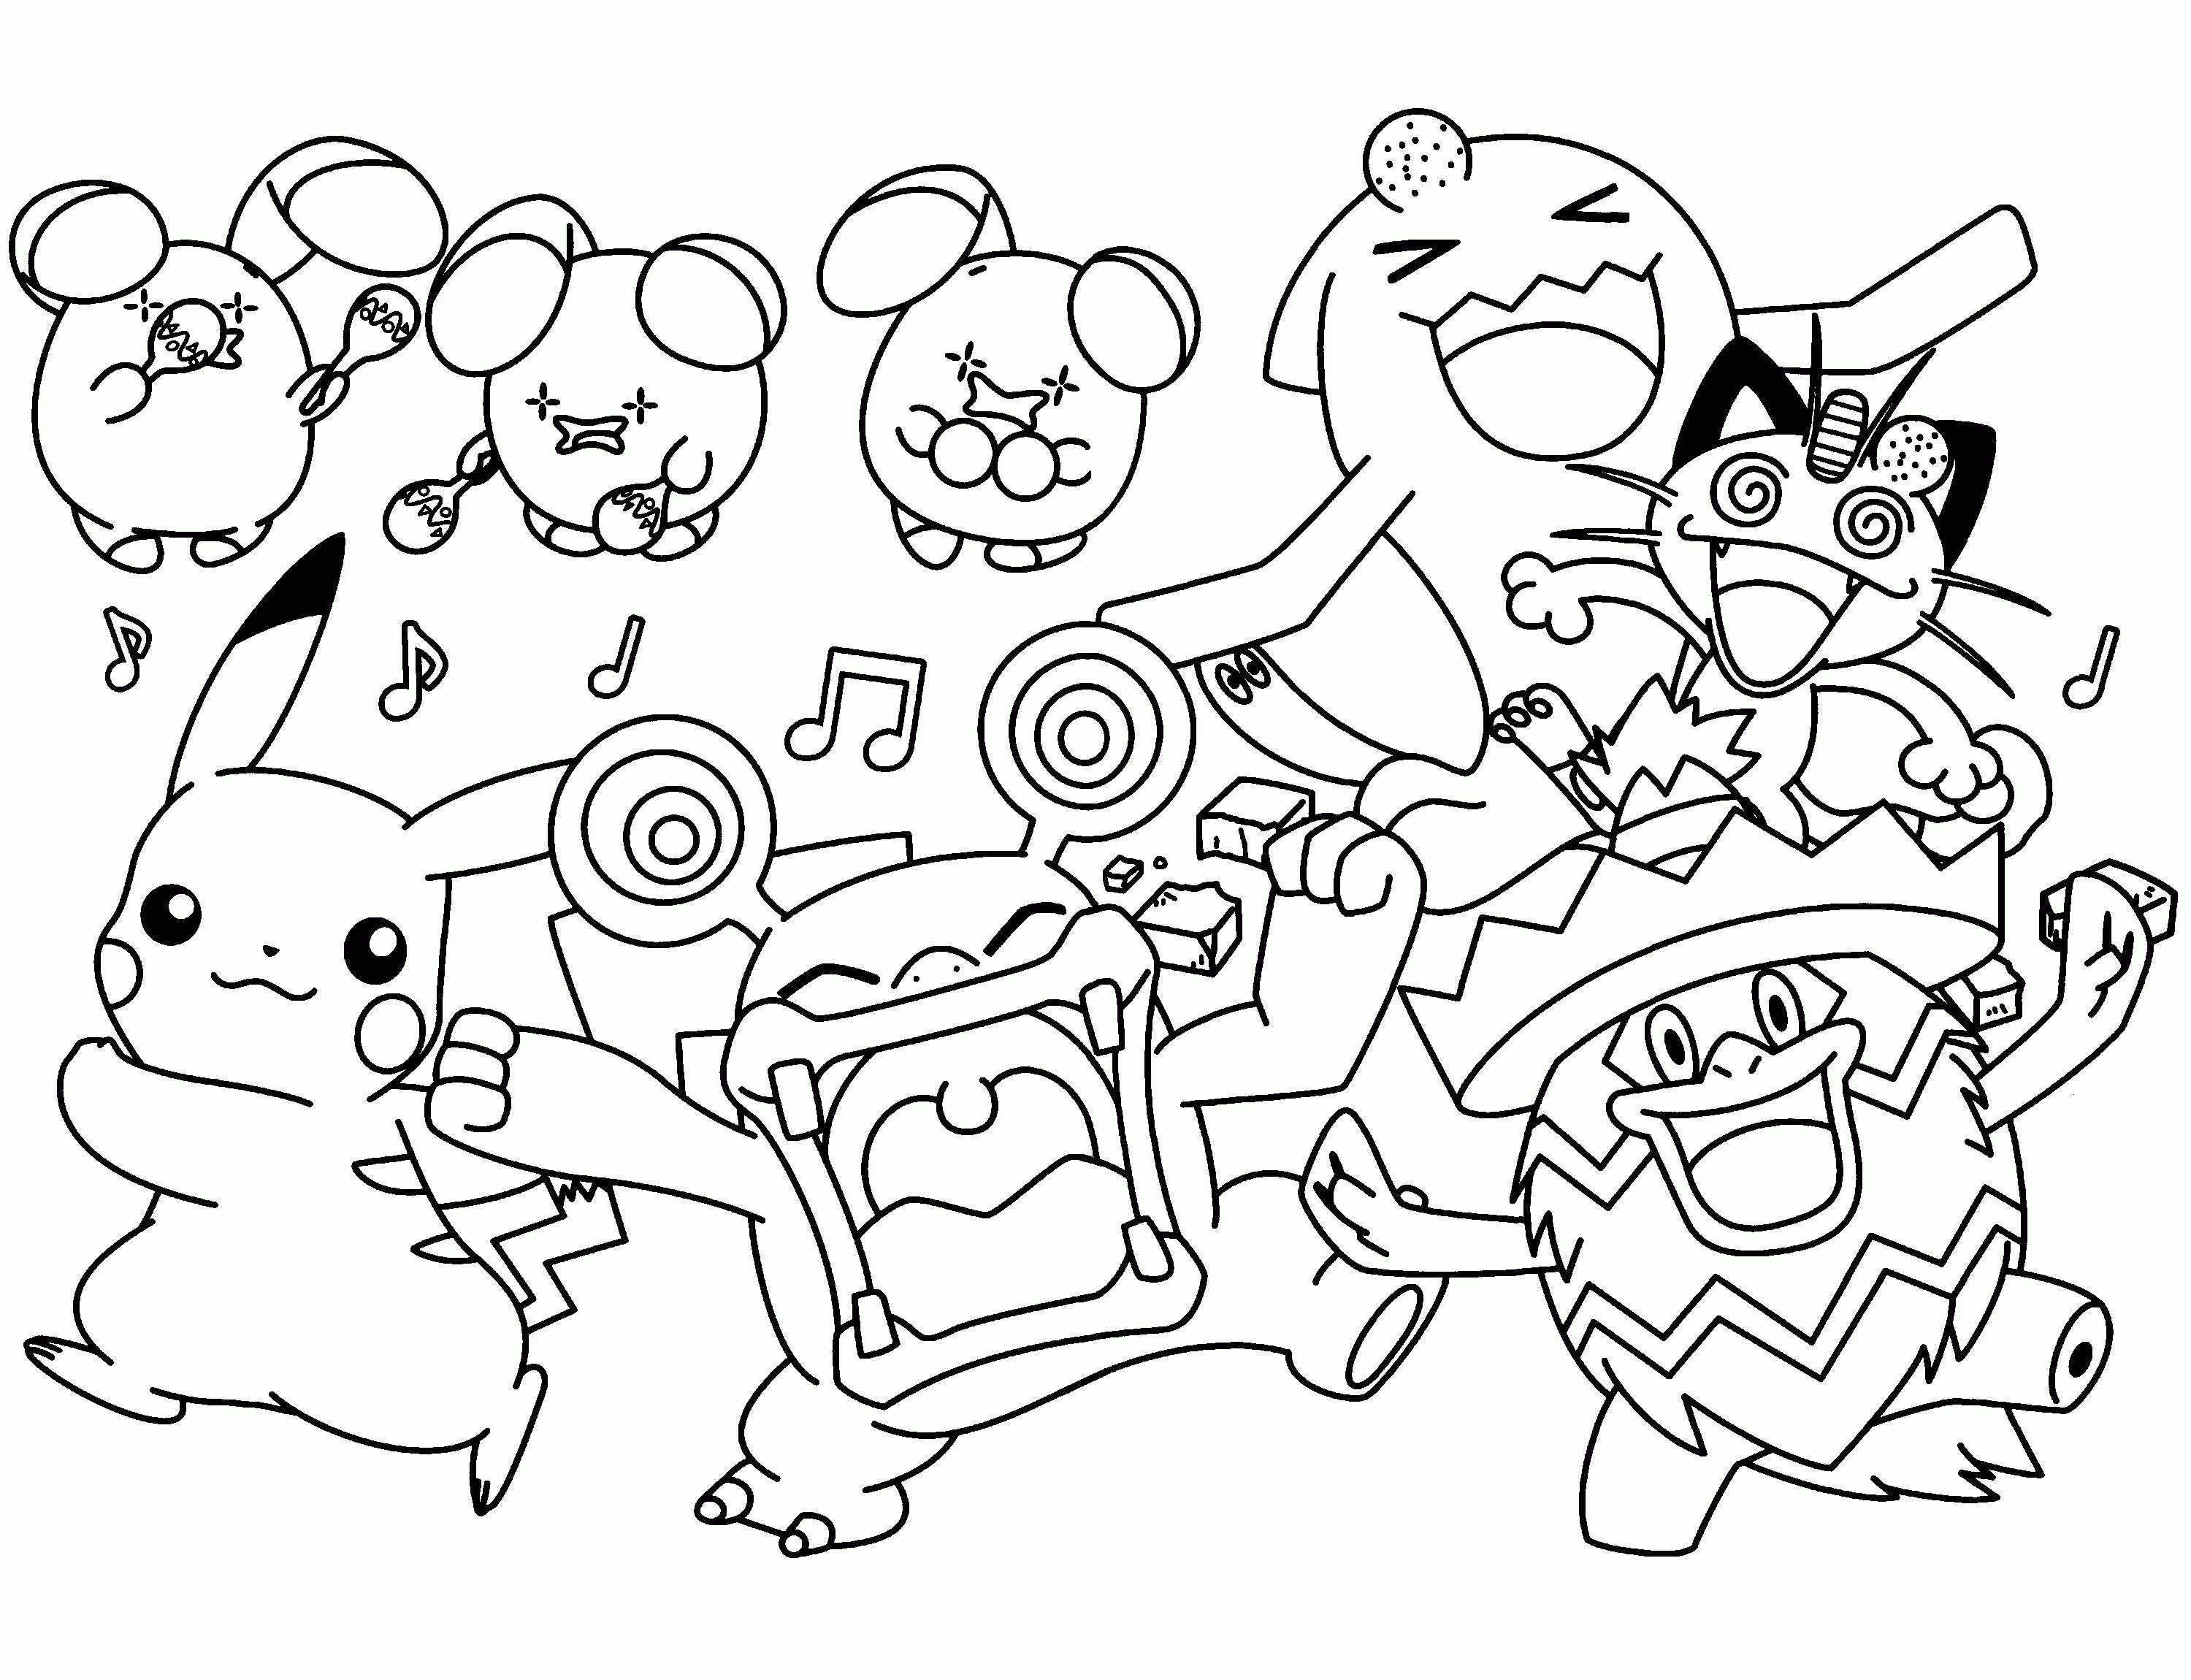 Pokemon free to color for children - All Pokemon coloring pages Kids ...